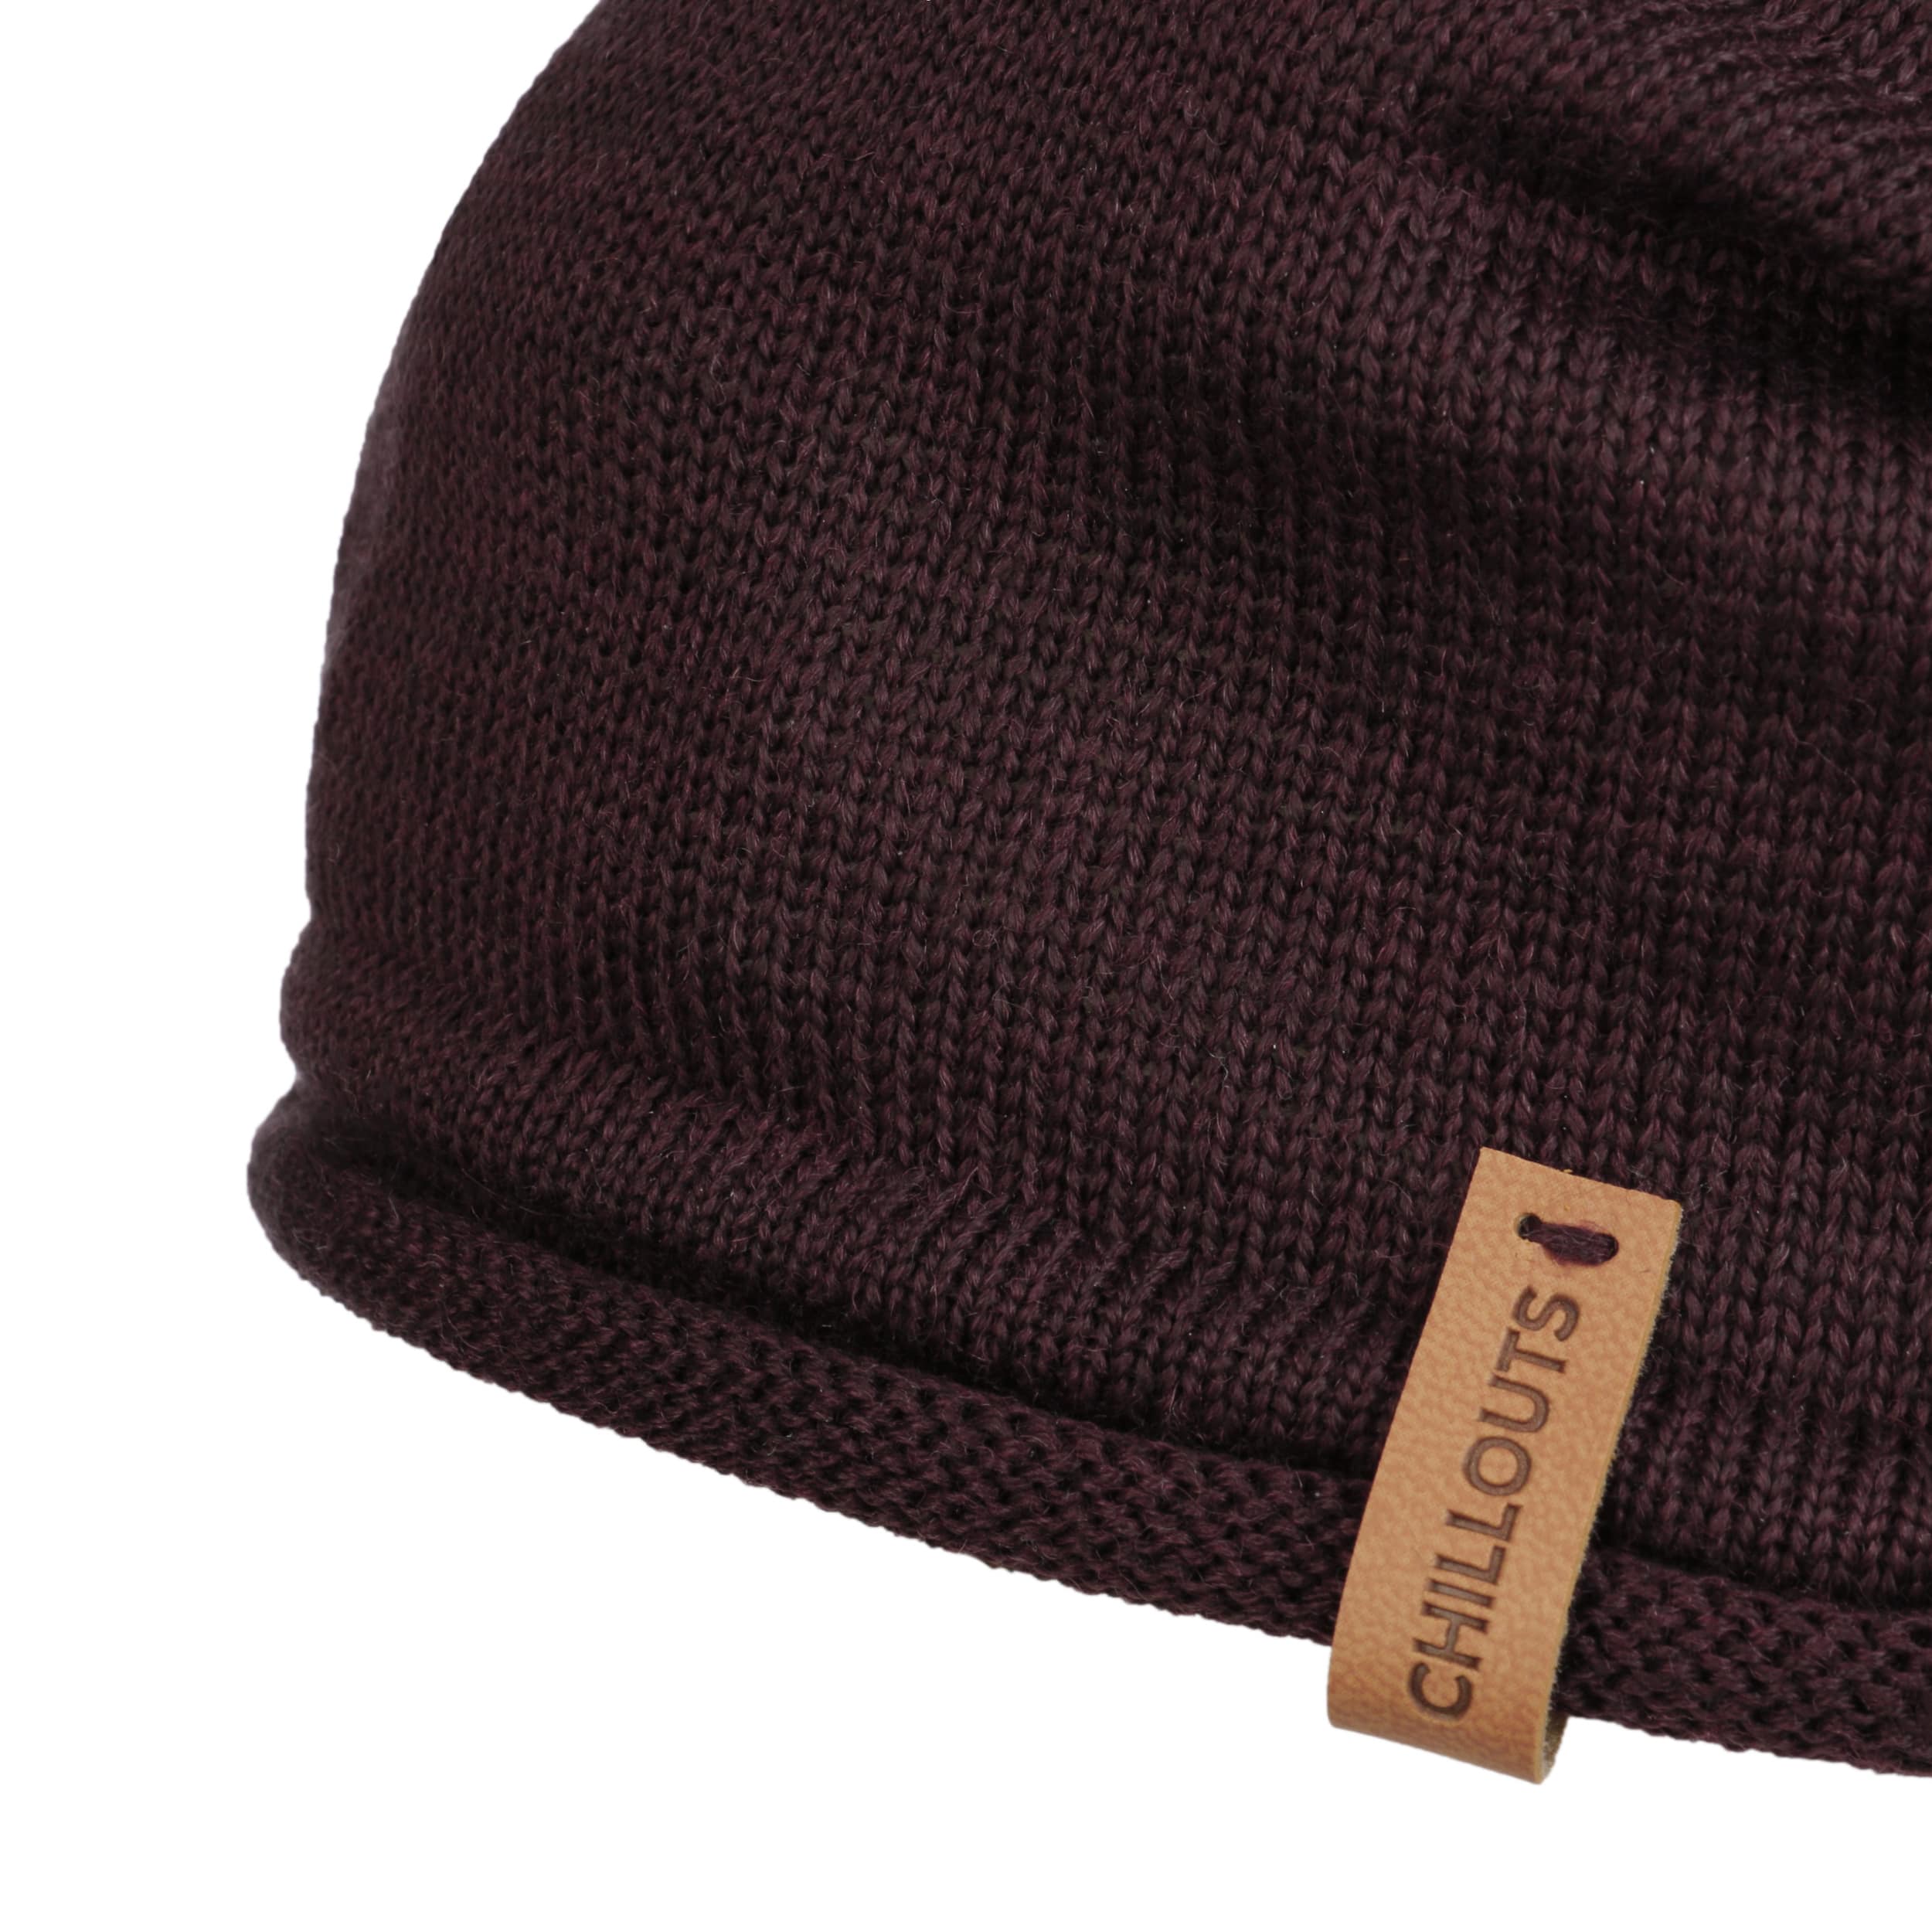 Leicester Oversize Beanie by Chillouts - € 29,95